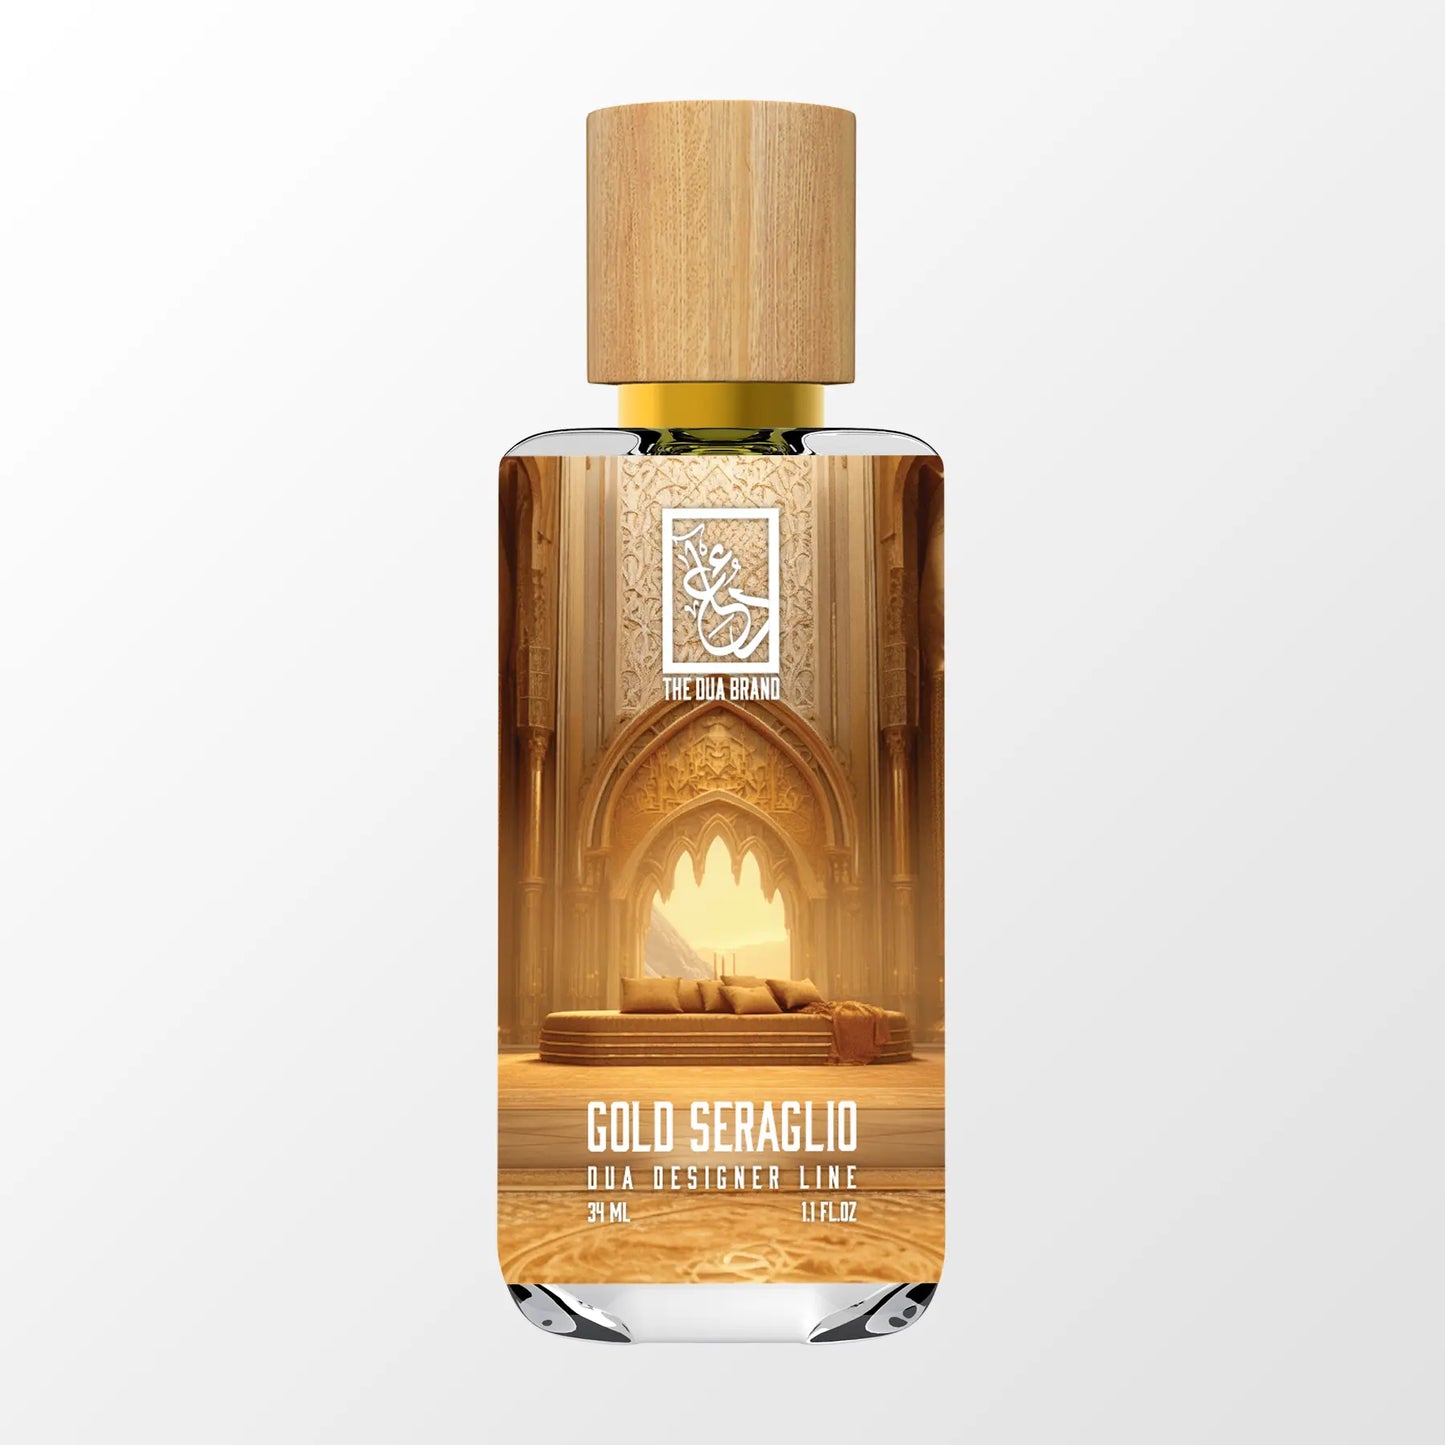 G DUA FRAGRANCES THAT START WITH THE LETTER G 3ML DECANTS *SHIPPING FREE ON ORDERS OVER $25